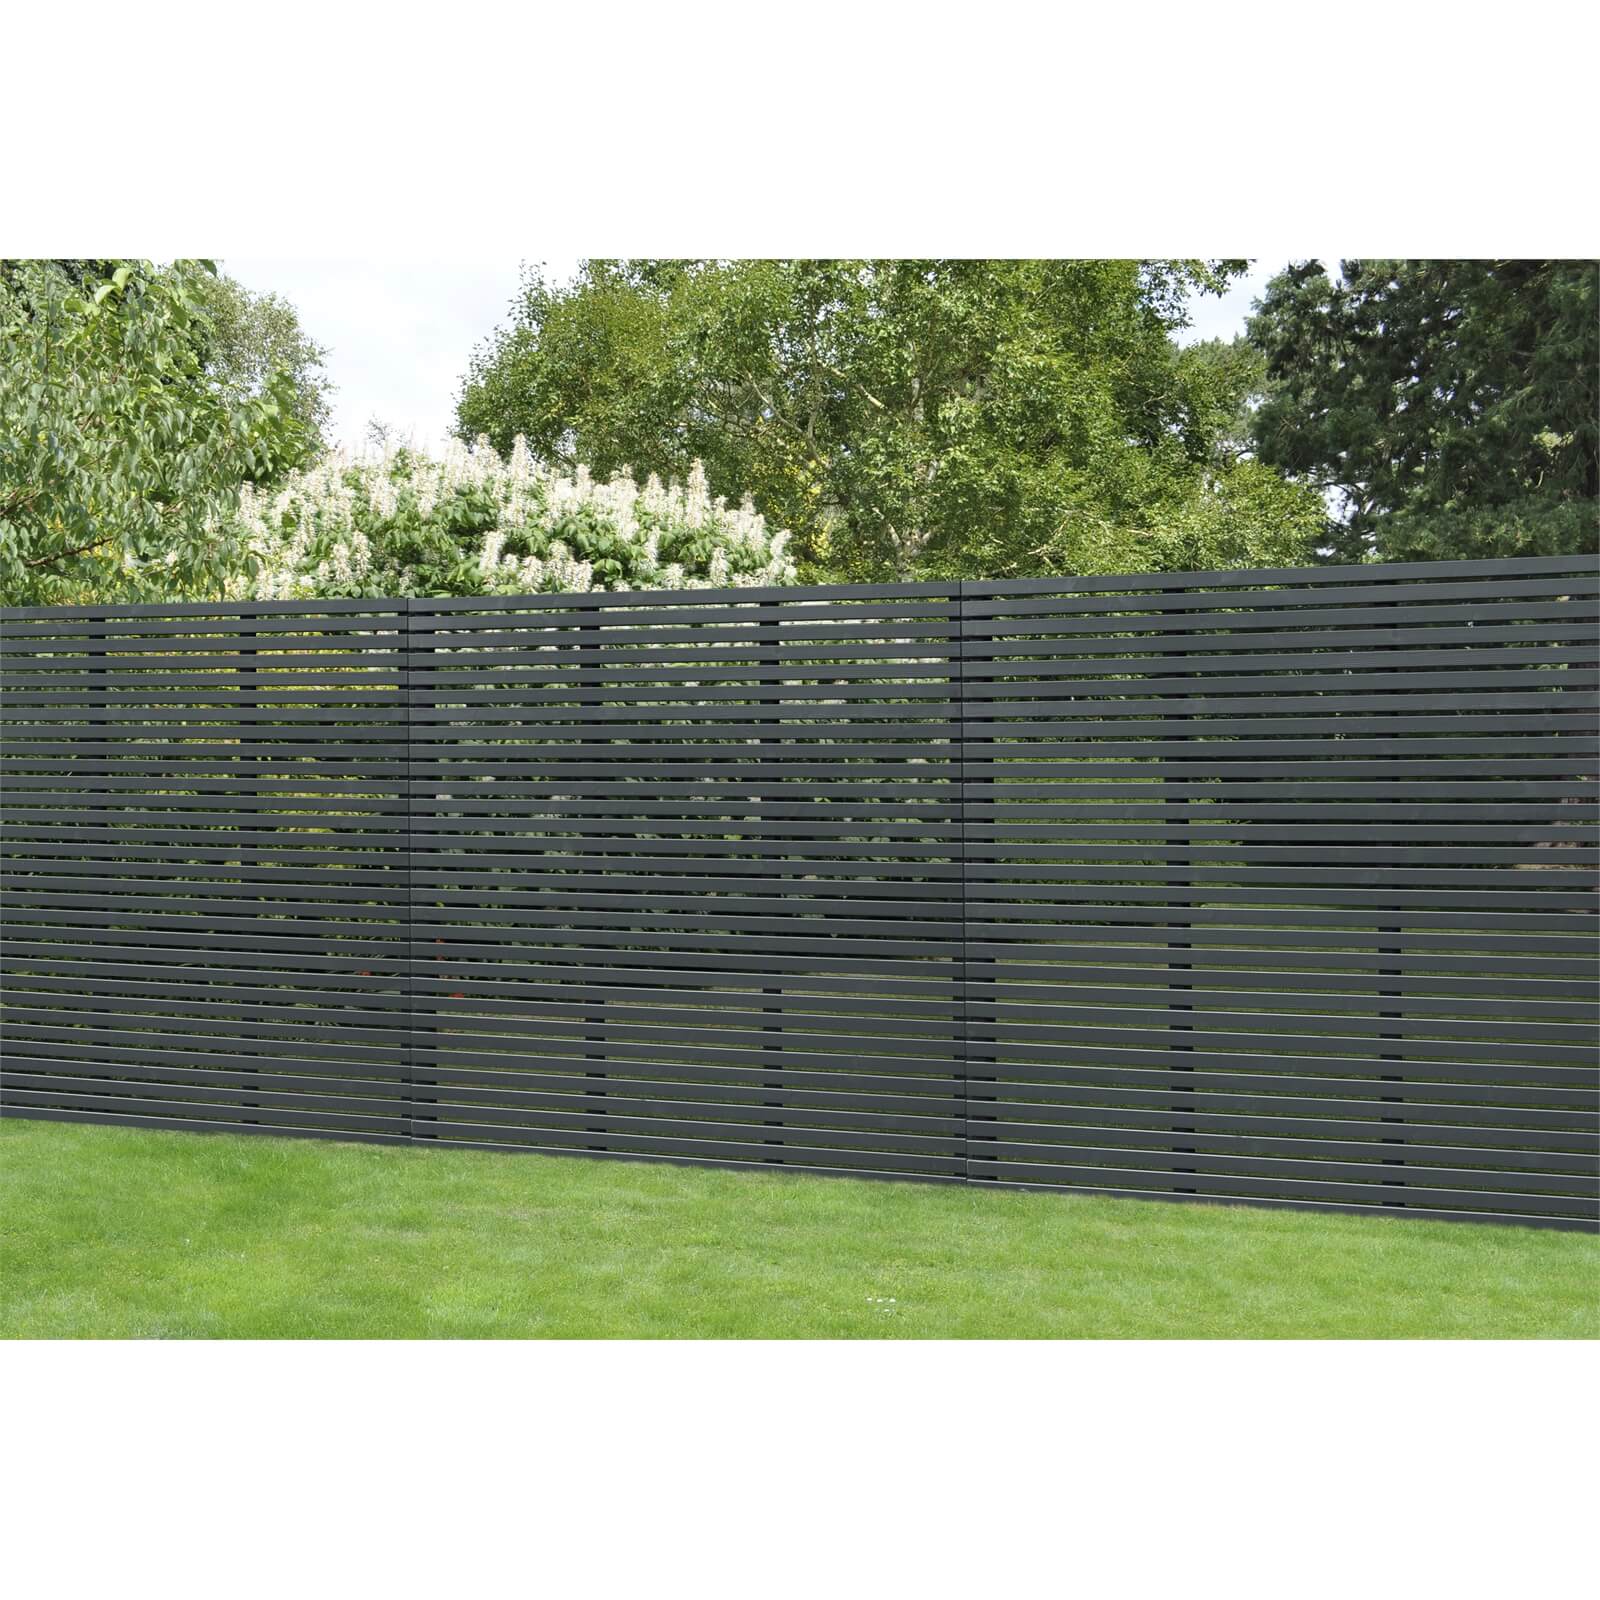 6ft x 6ft (1.8m x 1.8m) Grey Painted Contemporary Slatted Fence Panel - Pack of 5